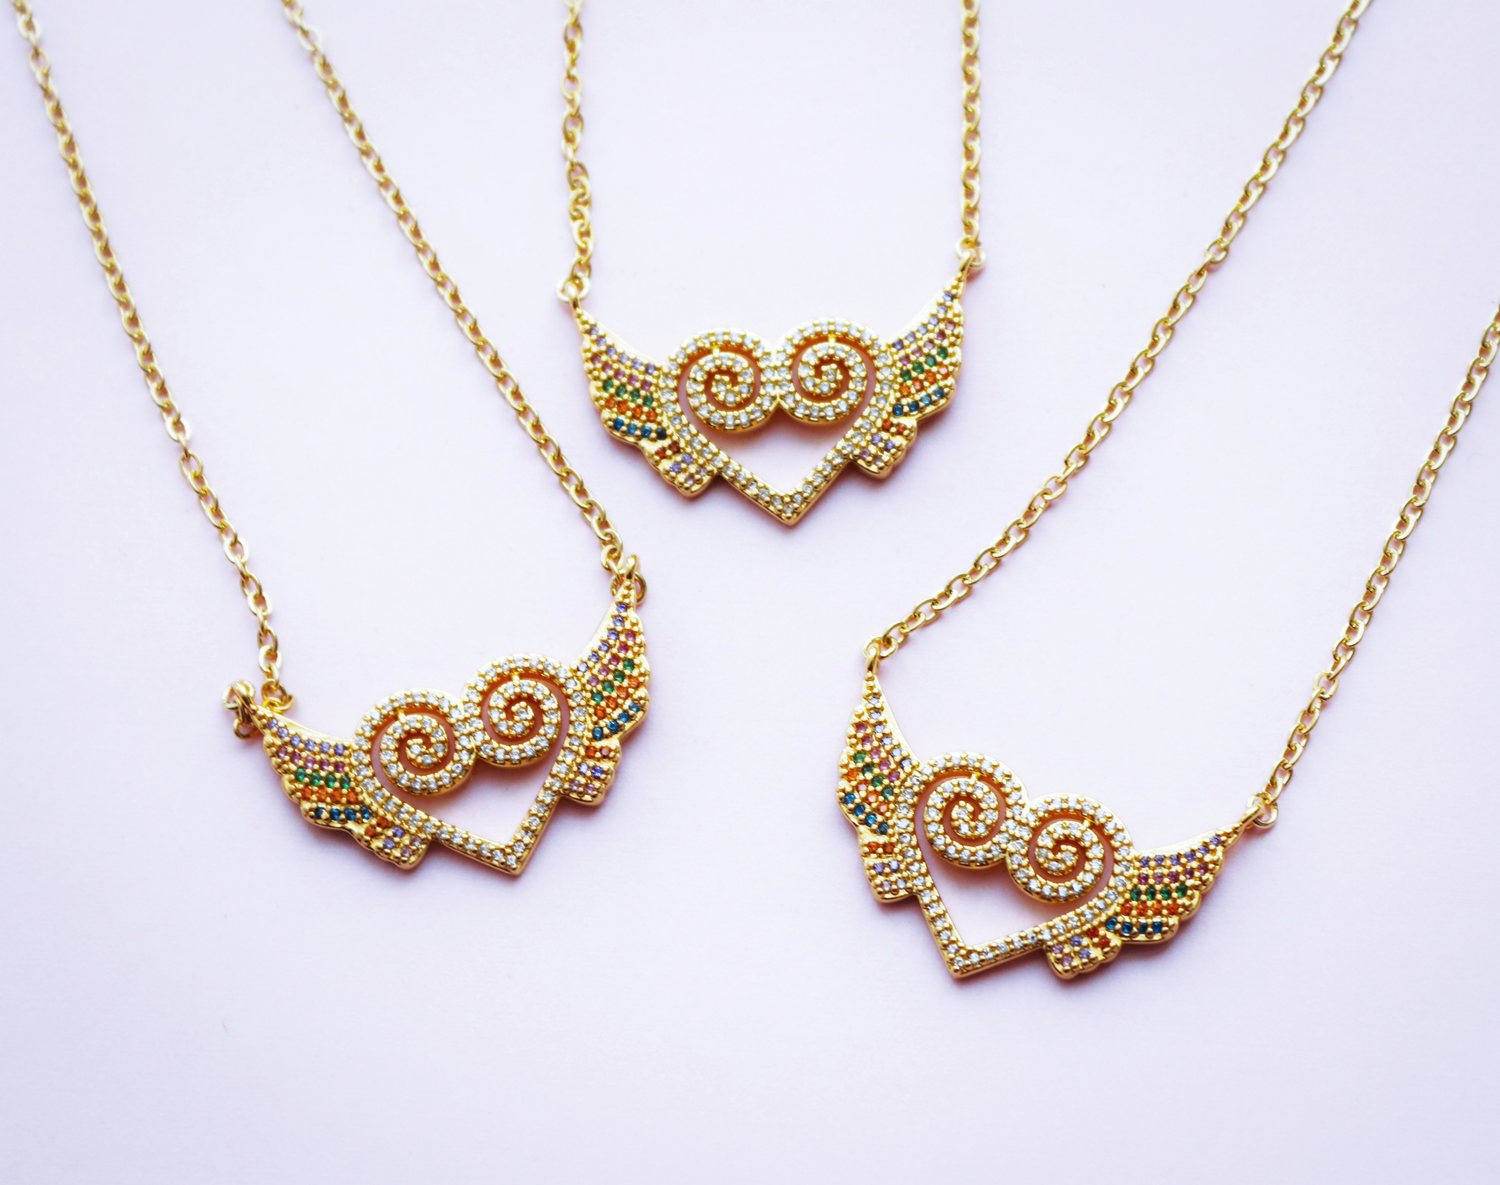 Hmong-Inspired Necklaces